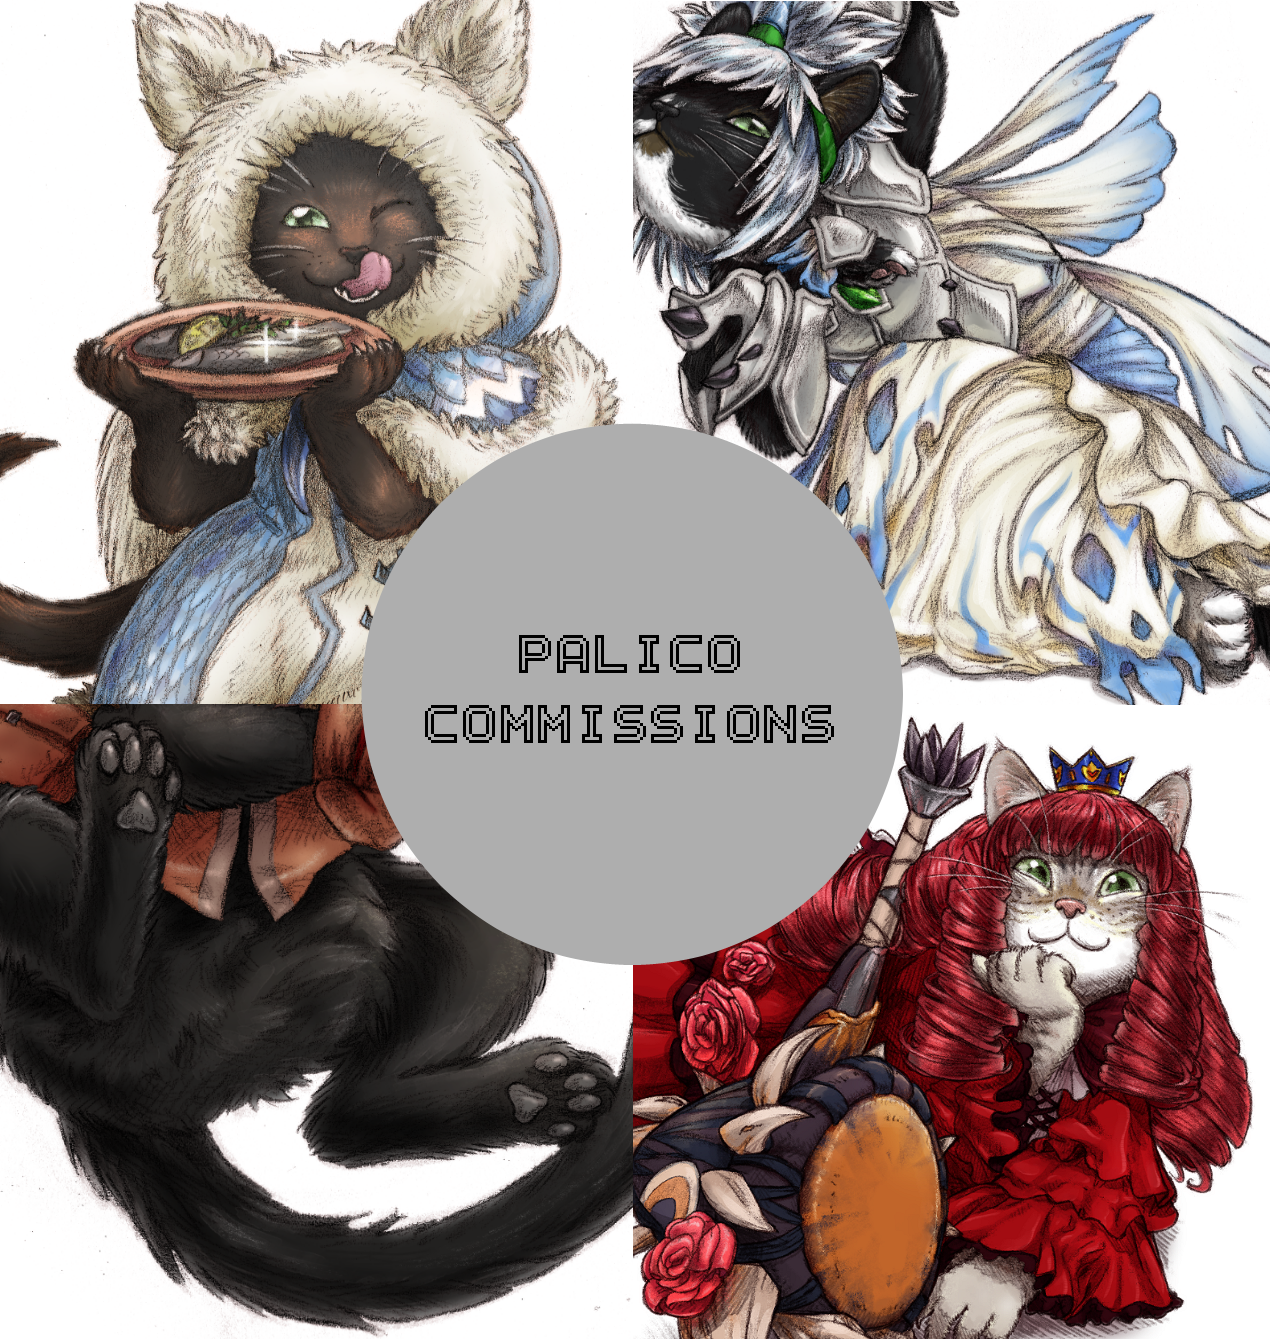 Featuring four mixed media (pencil and digital colors) commissions of client's cats illustrated as characters in Capcom's Monster Hunter franchise.